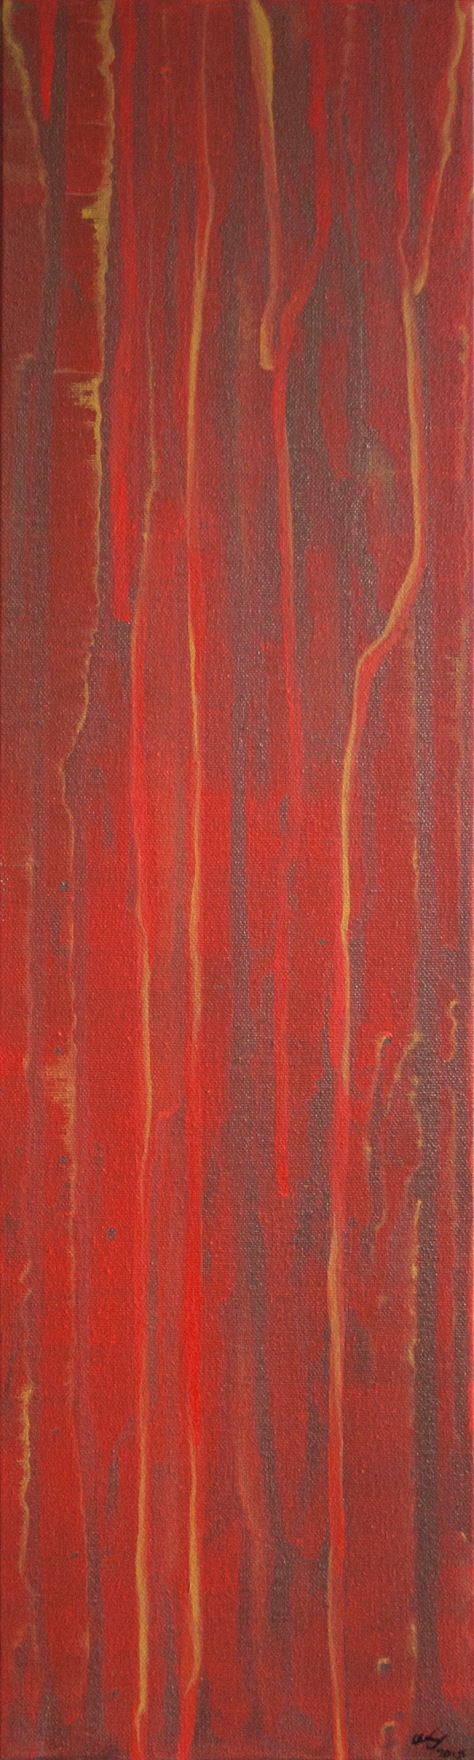 Tall red acrylic painting